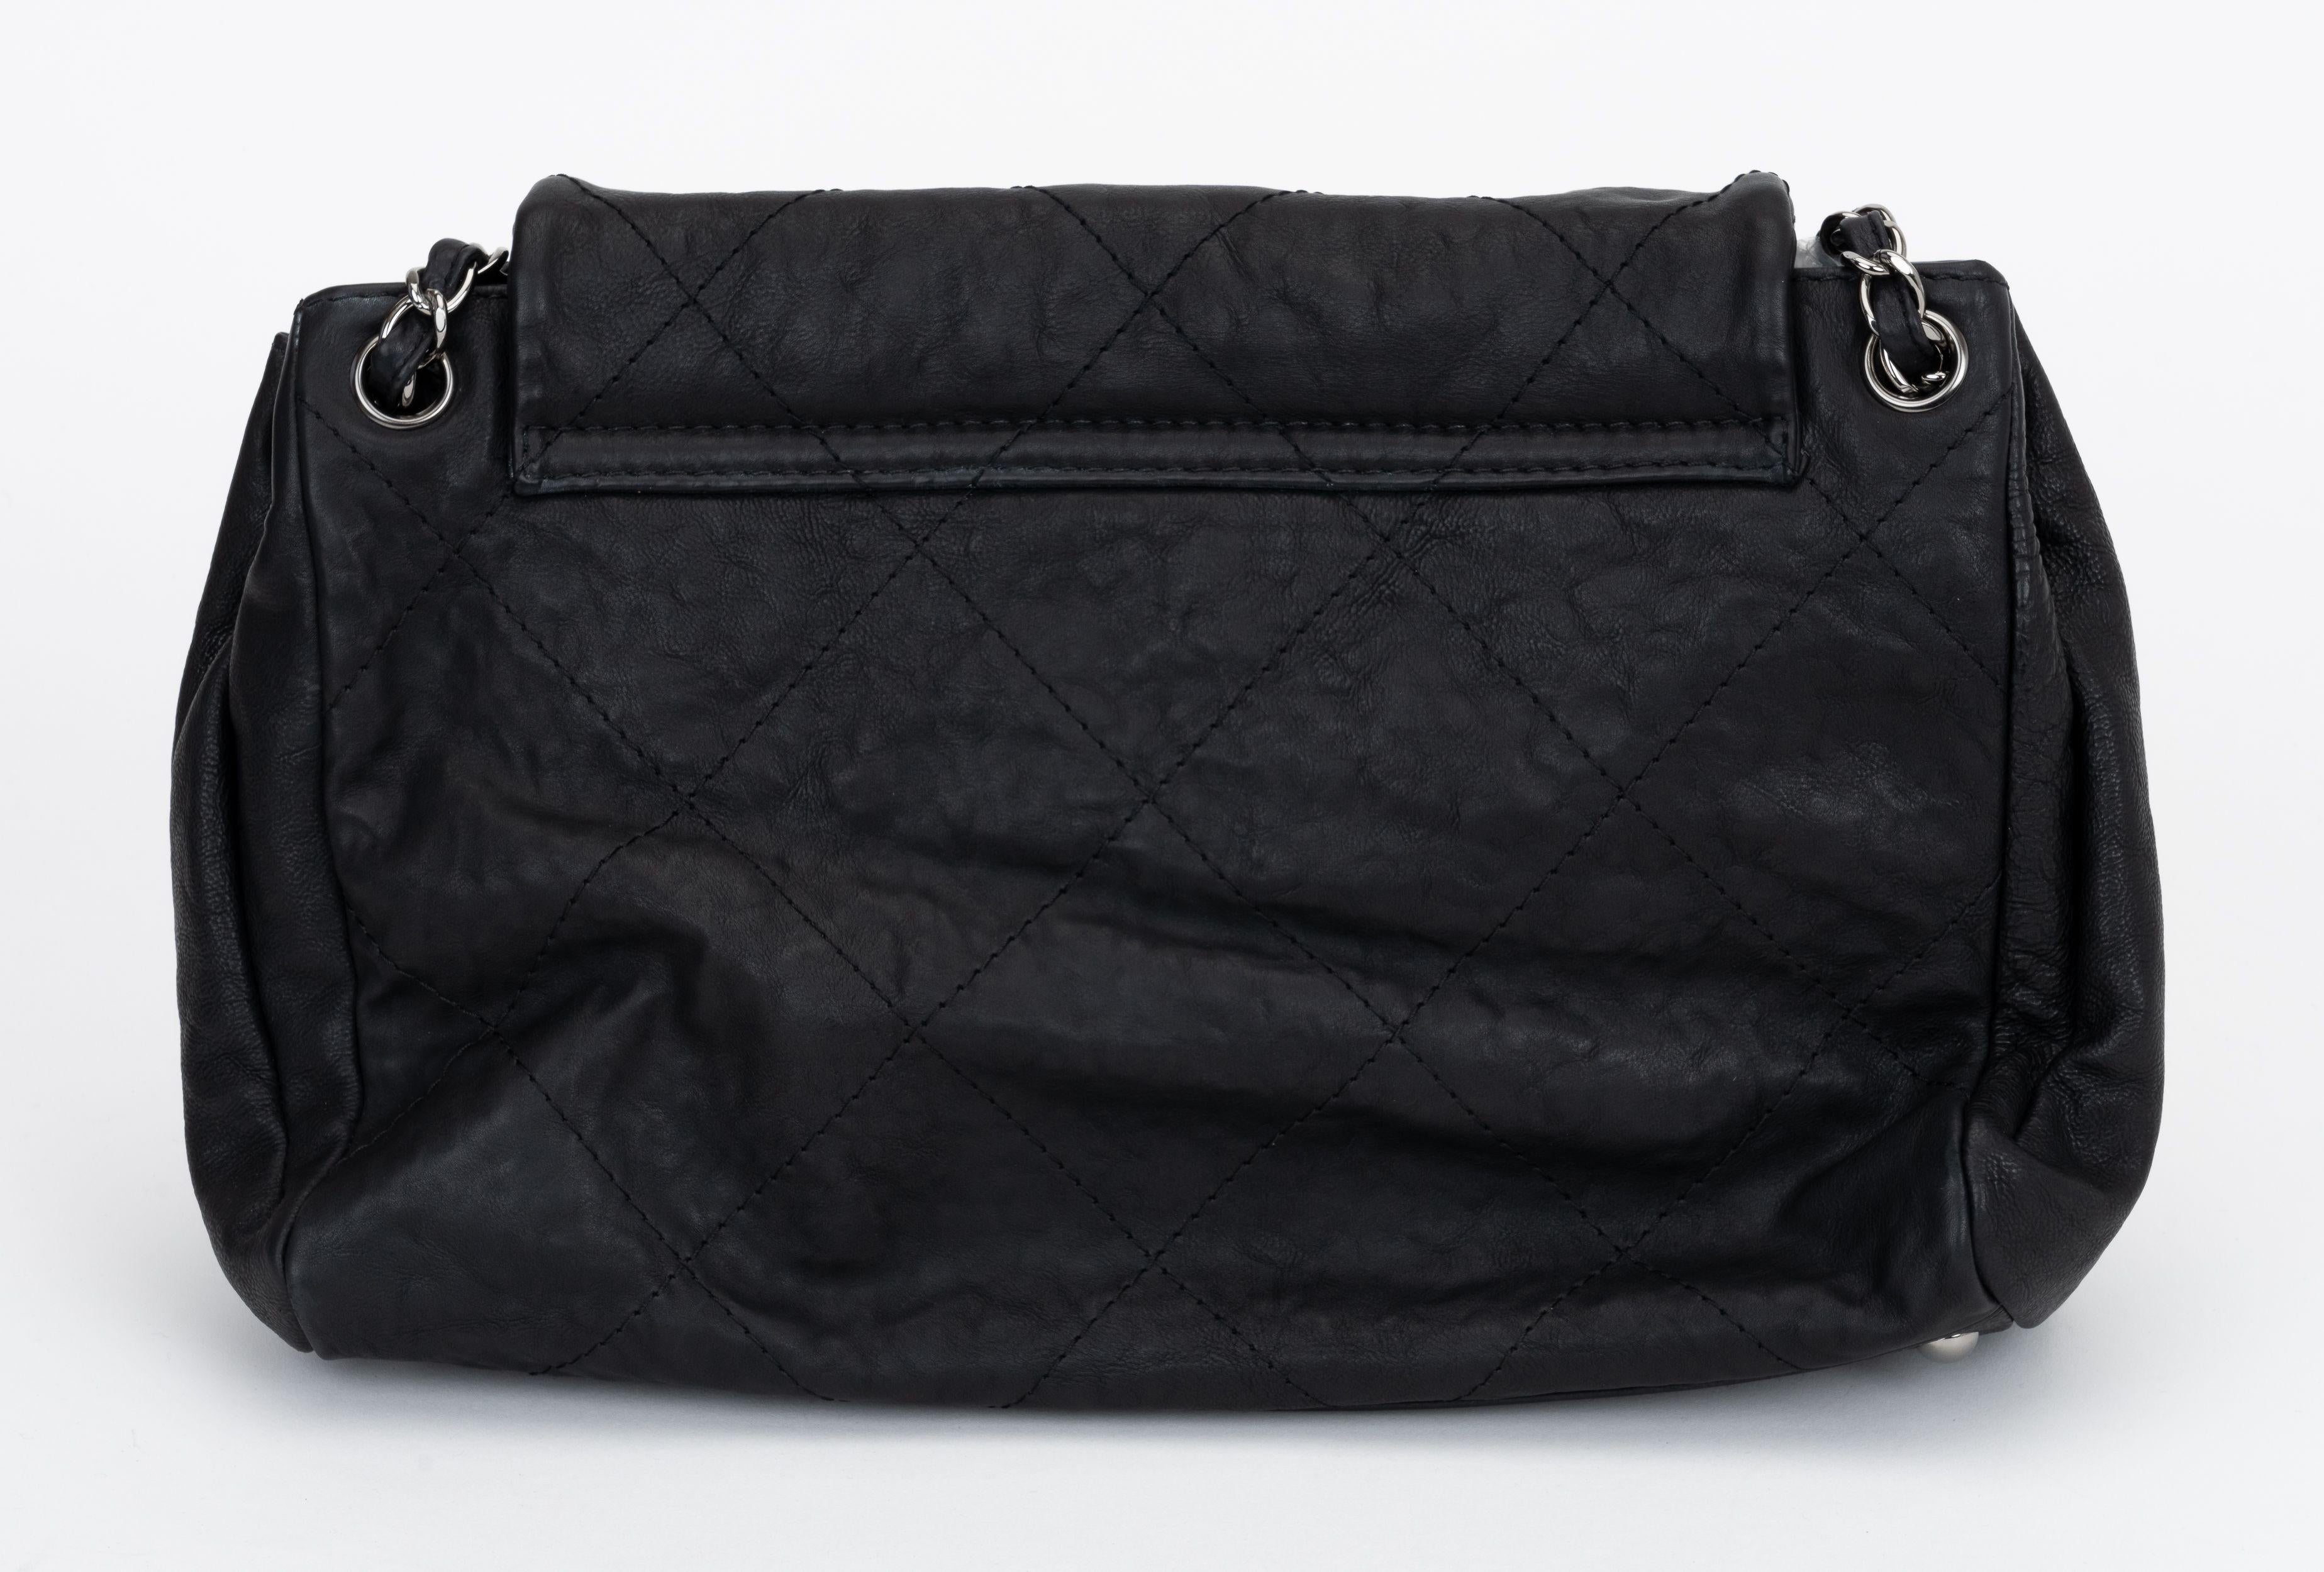 Chanel Black Flat Quilted Shoulder Bag In Excellent Condition For Sale In West Hollywood, CA